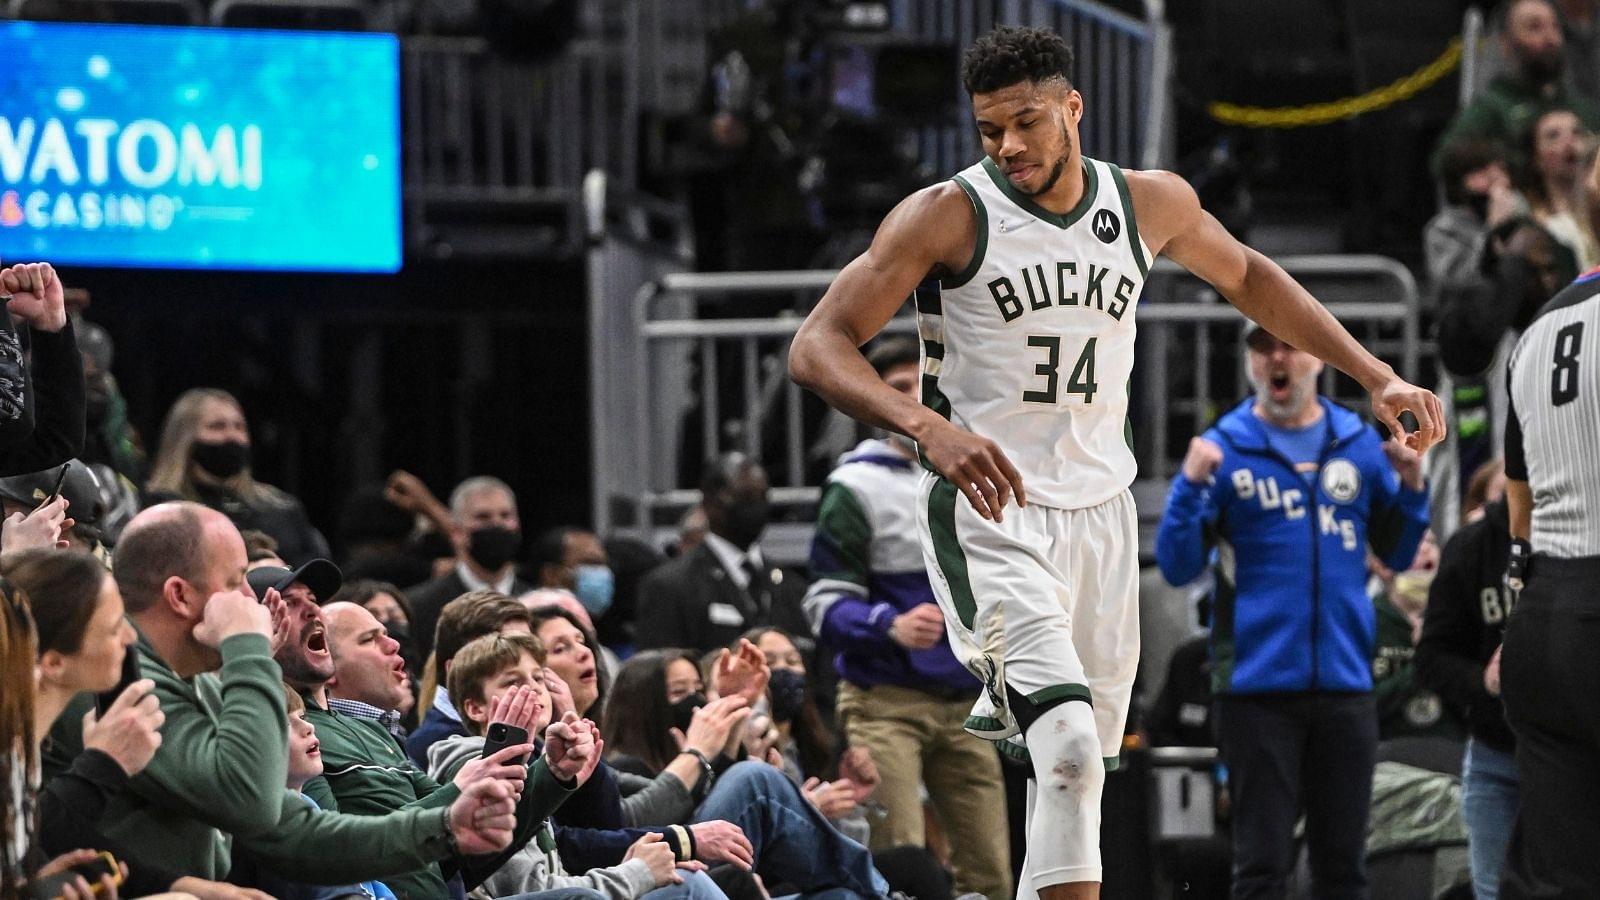 "Milwaukee Bucks are on track to have the worst record for defending champions": NBA Redditor brings up a stat that shows Giannis's team could end up as worst reigning Champions in 20 years